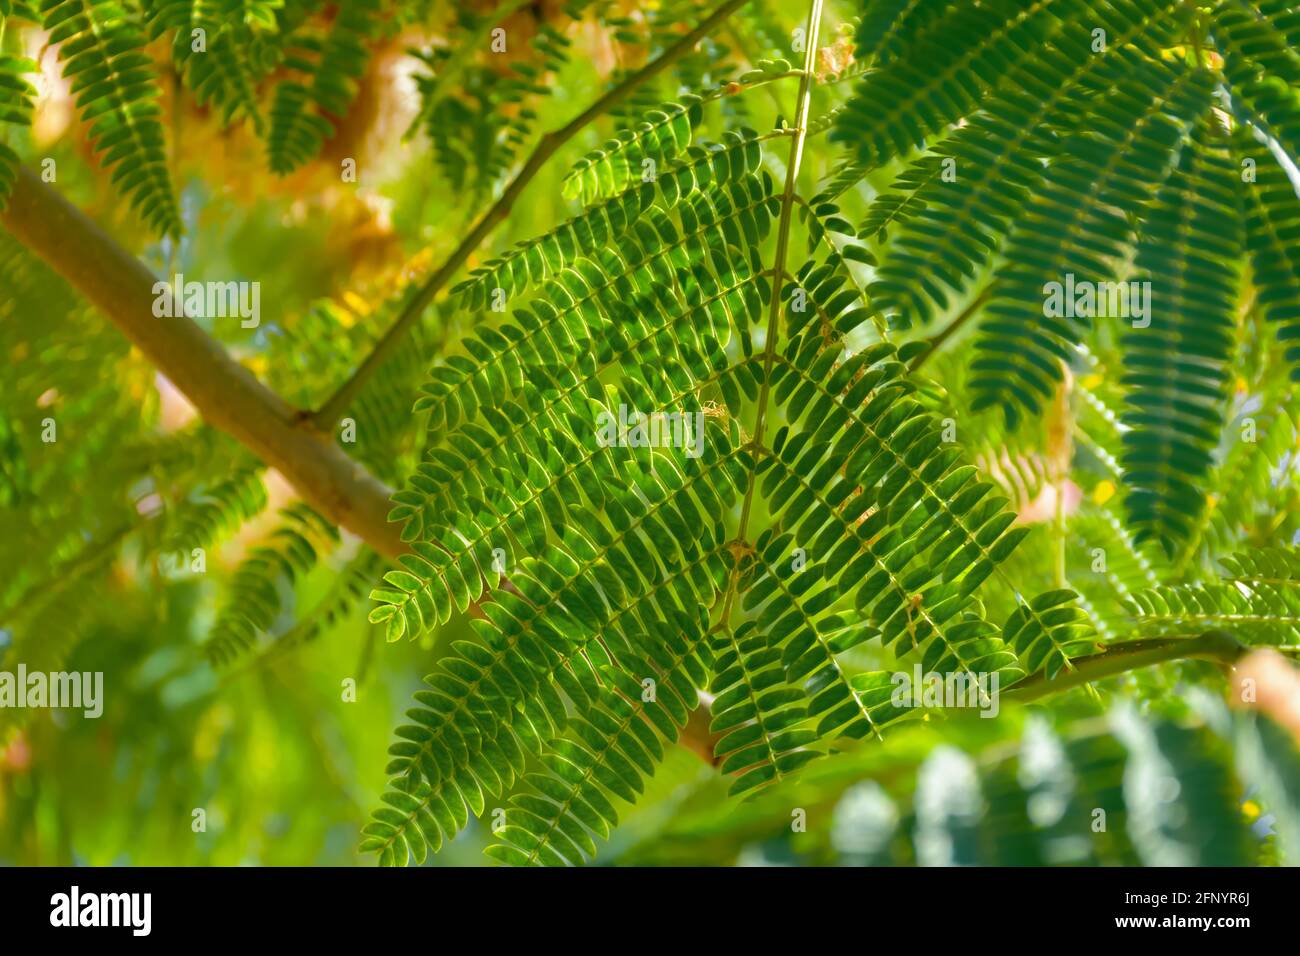 Lenkoran acacia albizia green carved leaves close-up. Summer abstract natural background. Low depth of field with blurring. Copy space, tropical natur Stock Photo